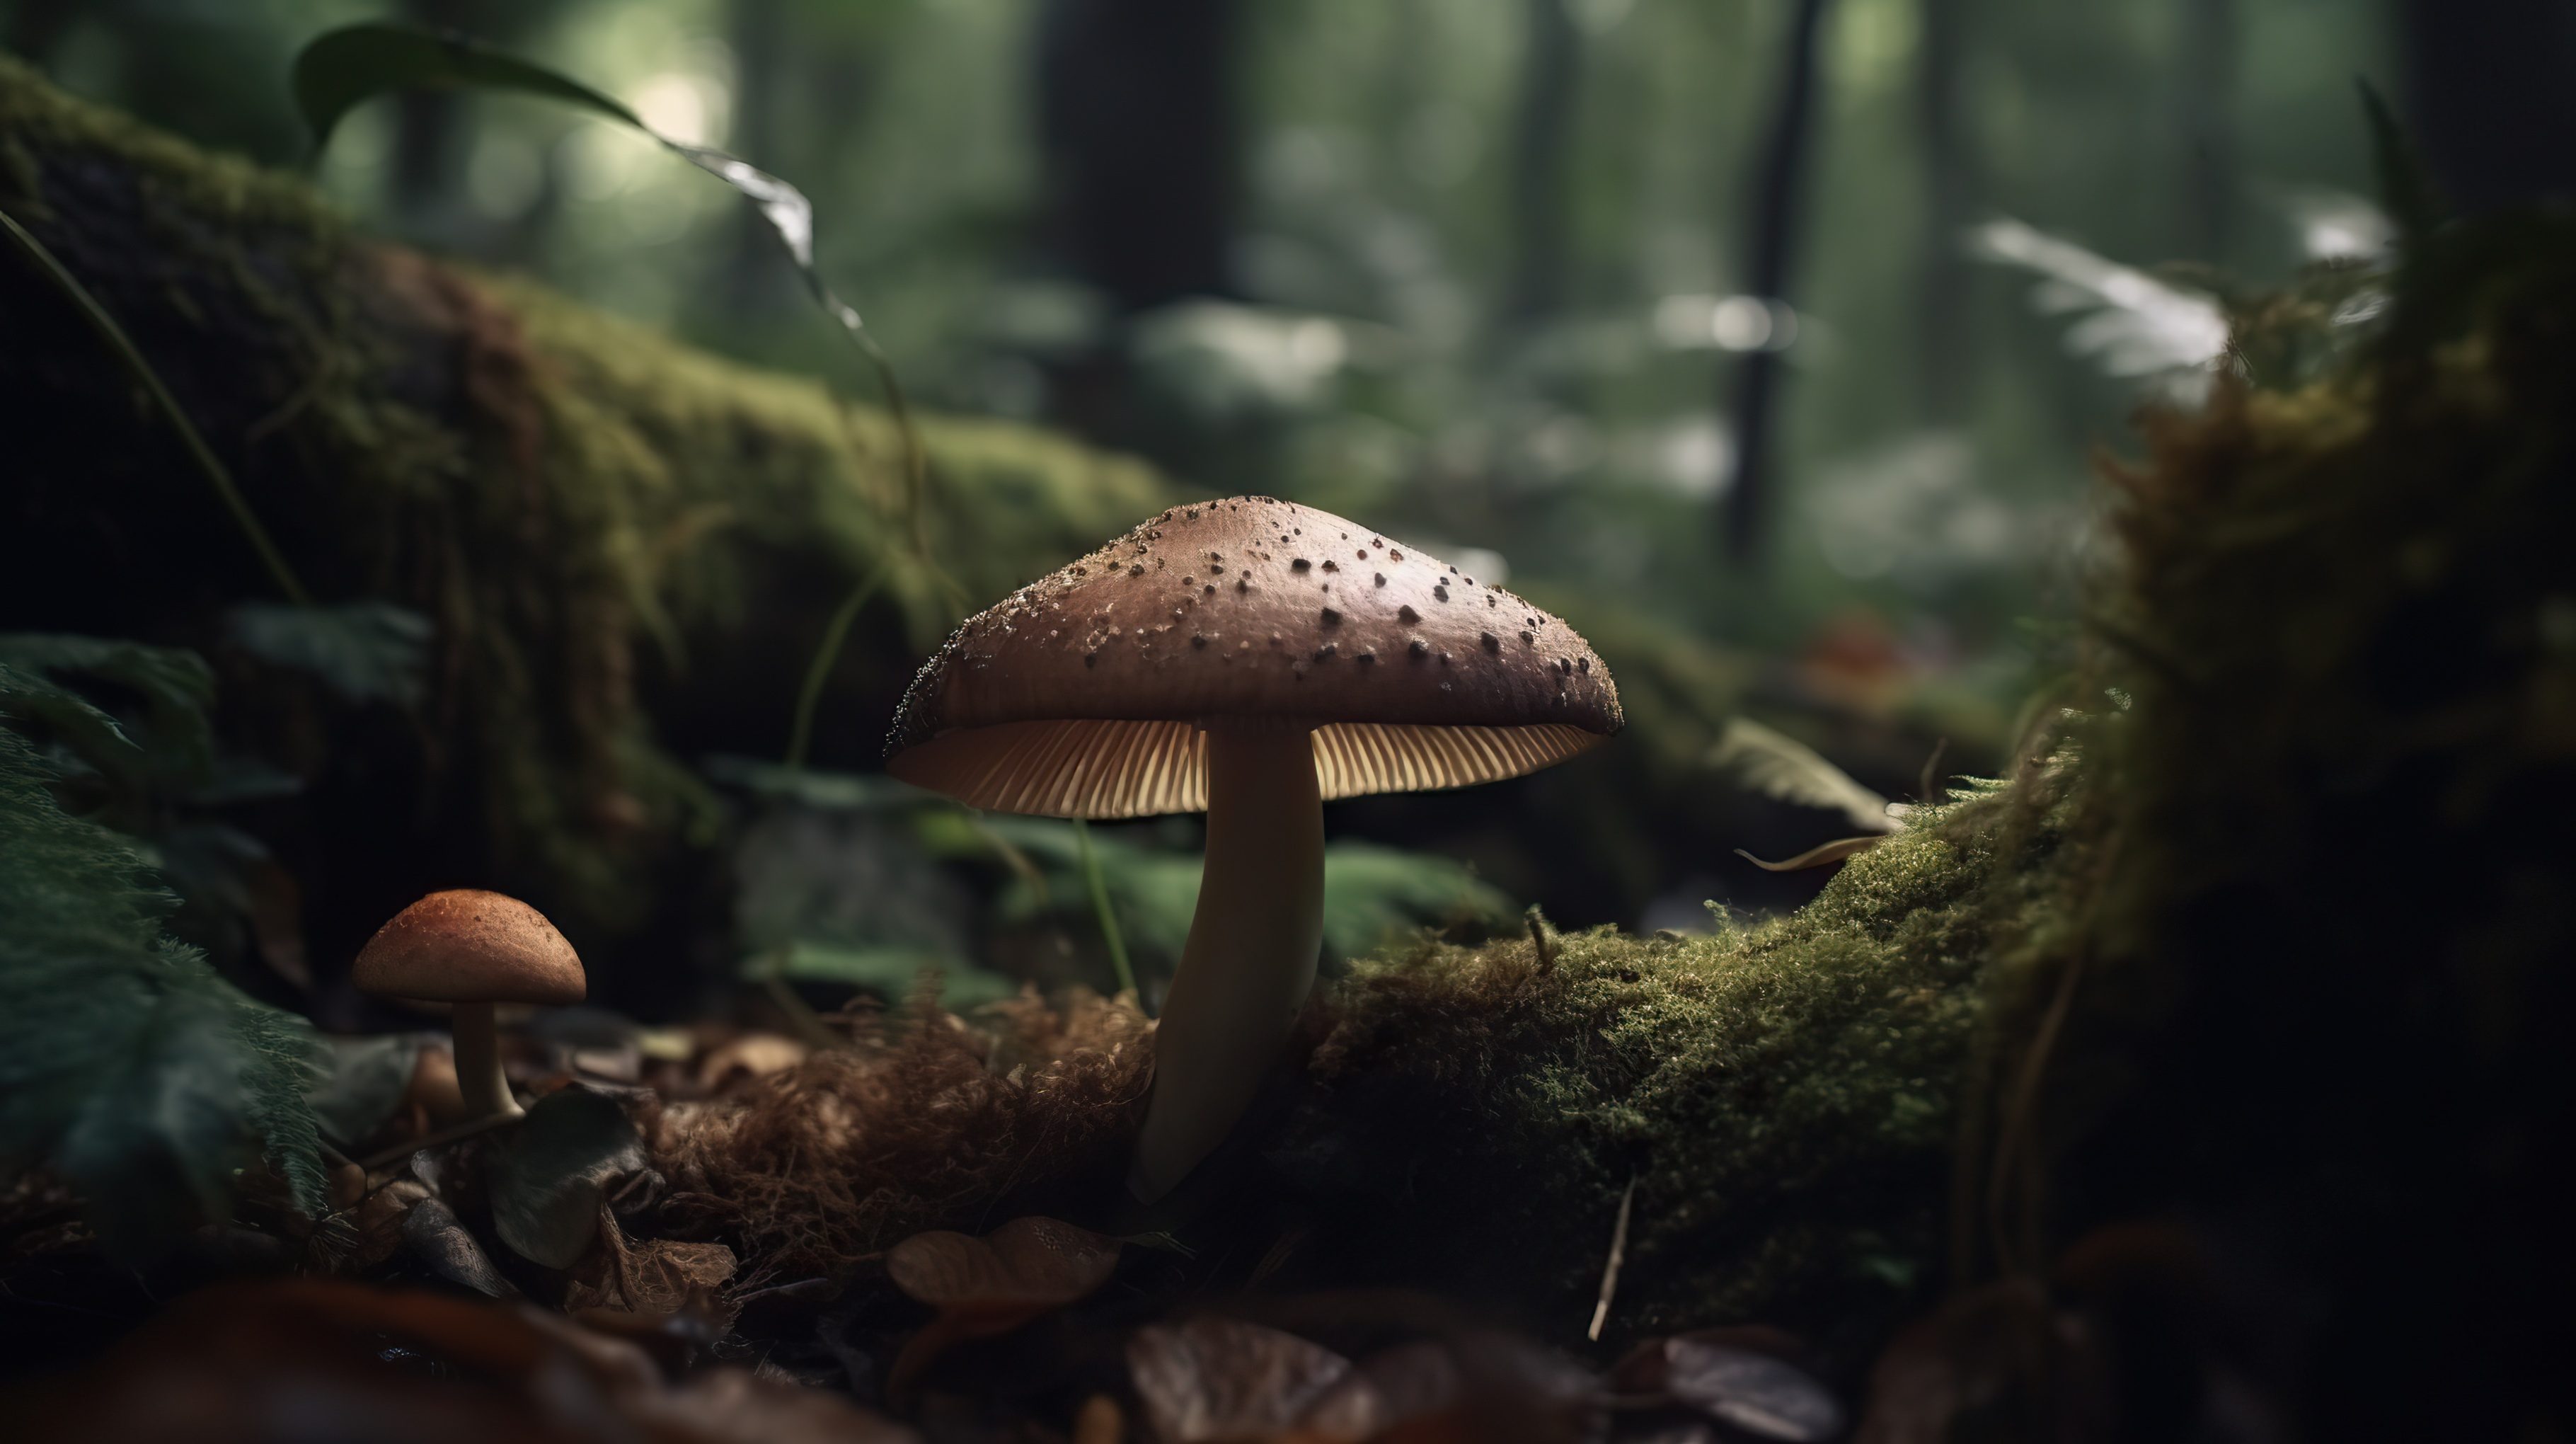 Close-up shot of Mushroom in the Forest